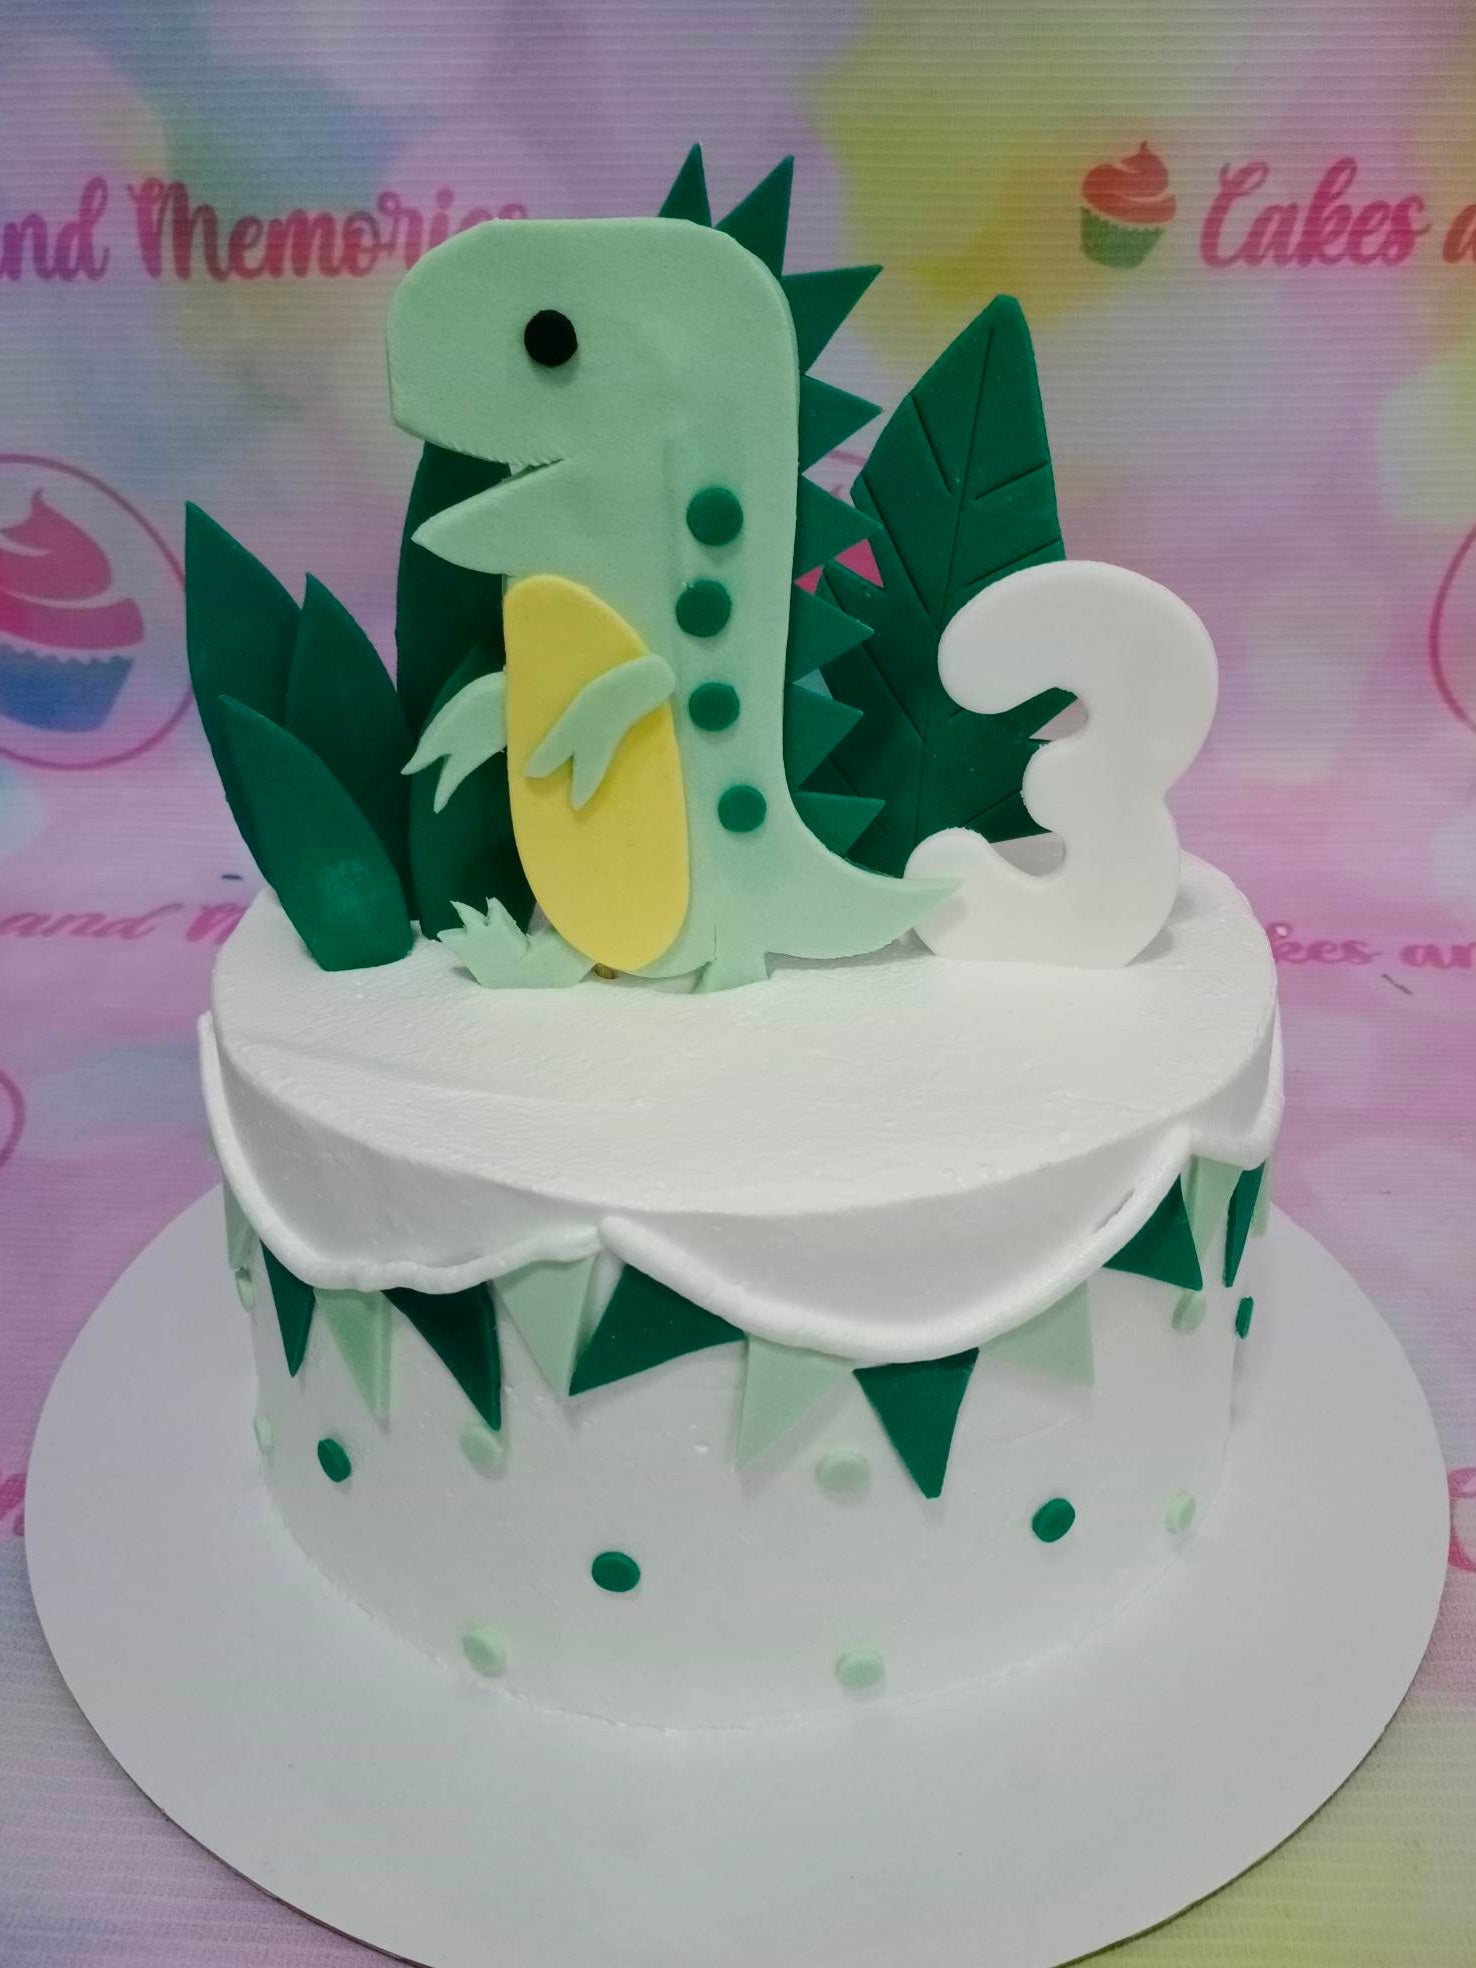 This Dinosaurs Cake customized for children's birthday is perfectly designed to entertain all guests. With white base and detailed green dino decorations, it is sure to bring the Jurassic Park and Jurassic World experience to life. Every detail of this dino cake is made with superior quality for a custom birthday cake.